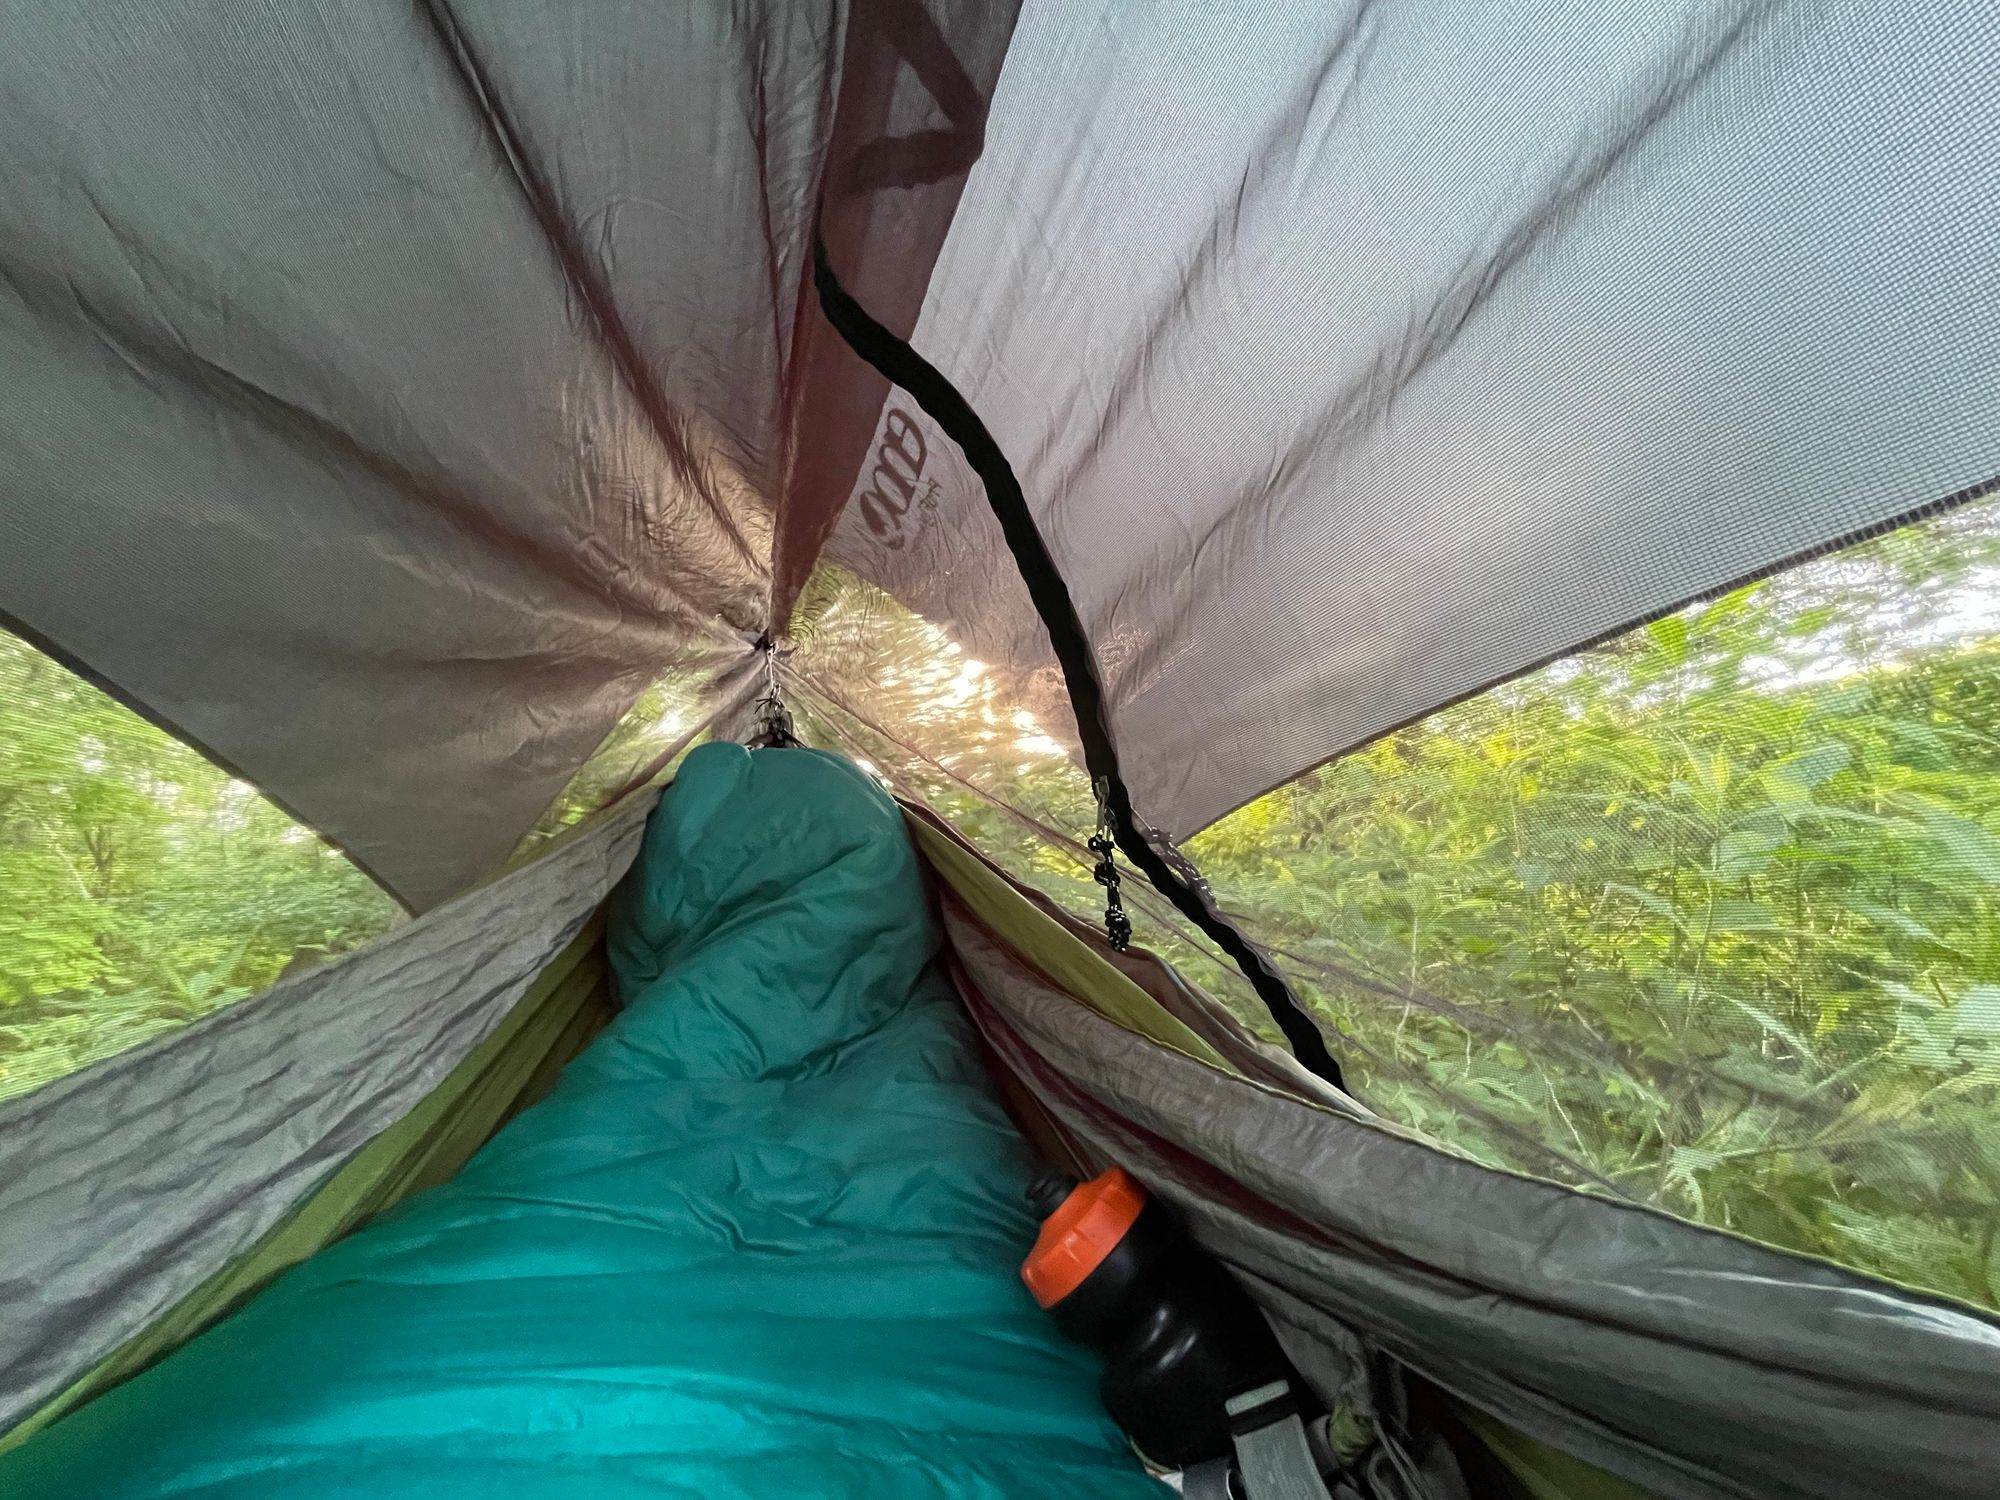 POV from the hammock. There's a bug net and rainfly overhead and my feet and legs are in the sleeping bag. There's a water bottle tucked in, too.